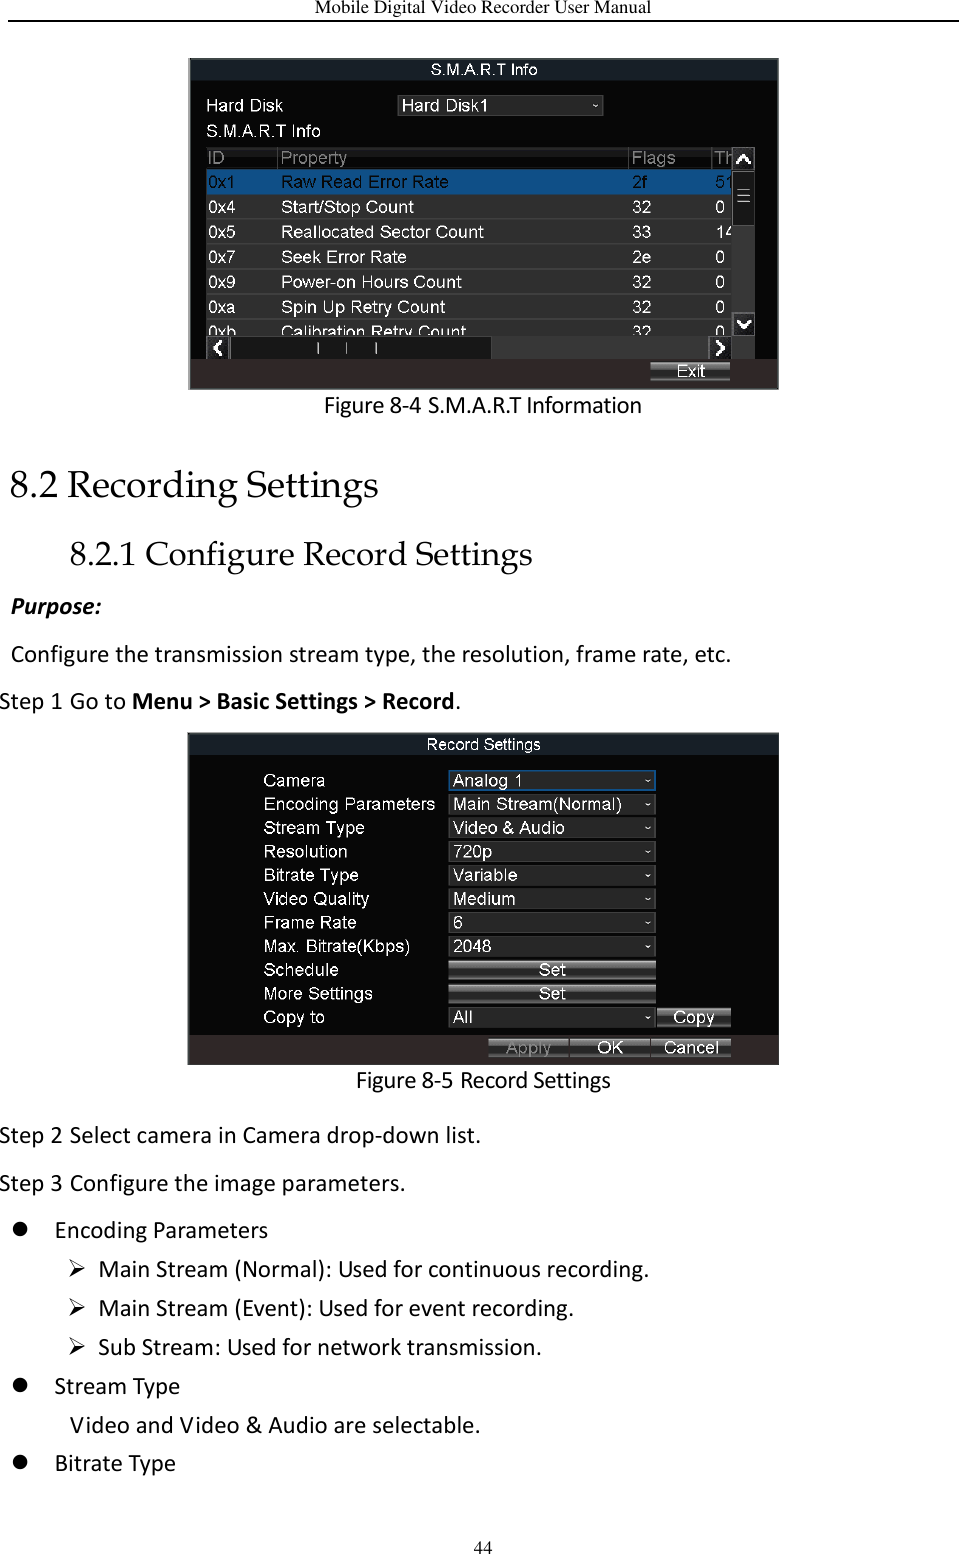 Mobile Digital Video Recorder User Manual 44  Figure 8-4 S.M.A.R.T Information 8.2 Recording Settings 8.2.1 Configure Record Settings Purpose:   Configure the transmission stream type, the resolution, frame rate, etc. Step 1 Go to Menu &gt; Basic Settings &gt; Record.  Figure 8-5 Record Settings   Step 2 Select camera in Camera drop-down list. Step 3 Configure the image parameters.  Encoding Parameters  Main Stream (Normal): Used for continuous recording.  Main Stream (Event): Used for event recording.    Sub Stream: Used for network transmission.  Stream Type Video and Video &amp; Audio are selectable.    Bitrate Type 